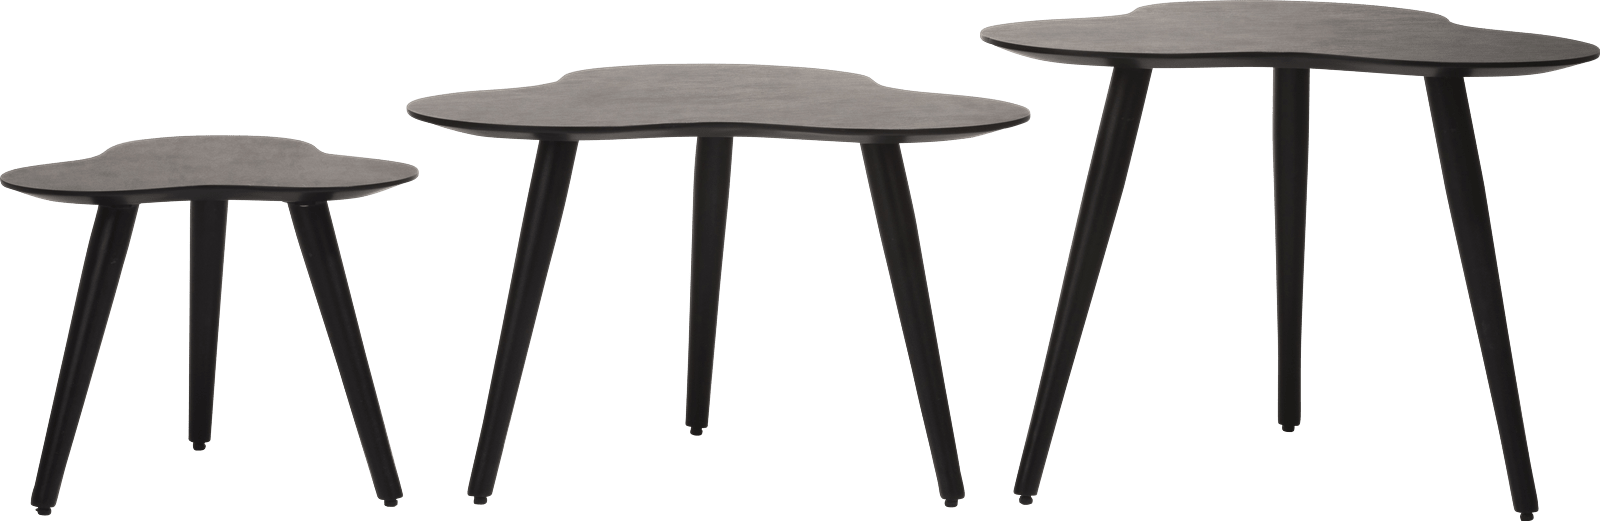 XOOON - Coco Maison - Cas set of 3 side tables